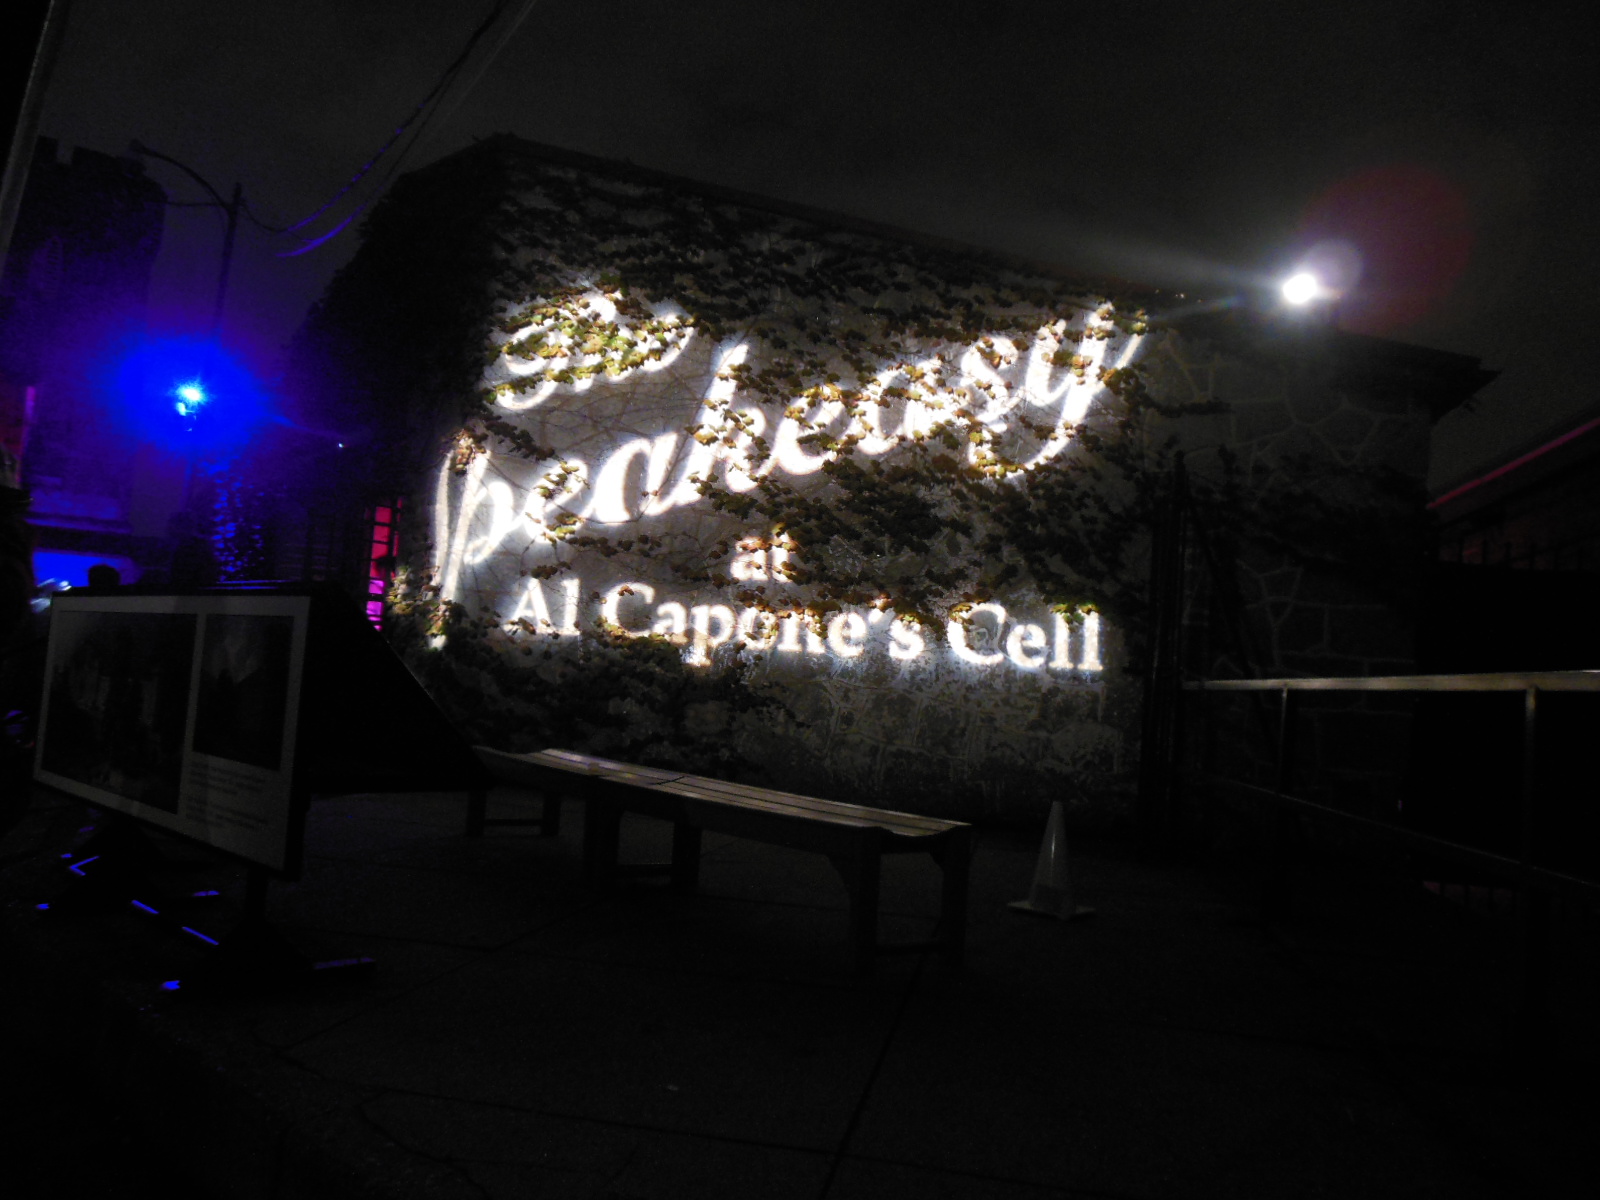 The Speakeasy at Al Capone's Cell is one of the attractions of Terror Behind The Walls at Eastern State Penitentiary(credit Anthony C. Hayes)